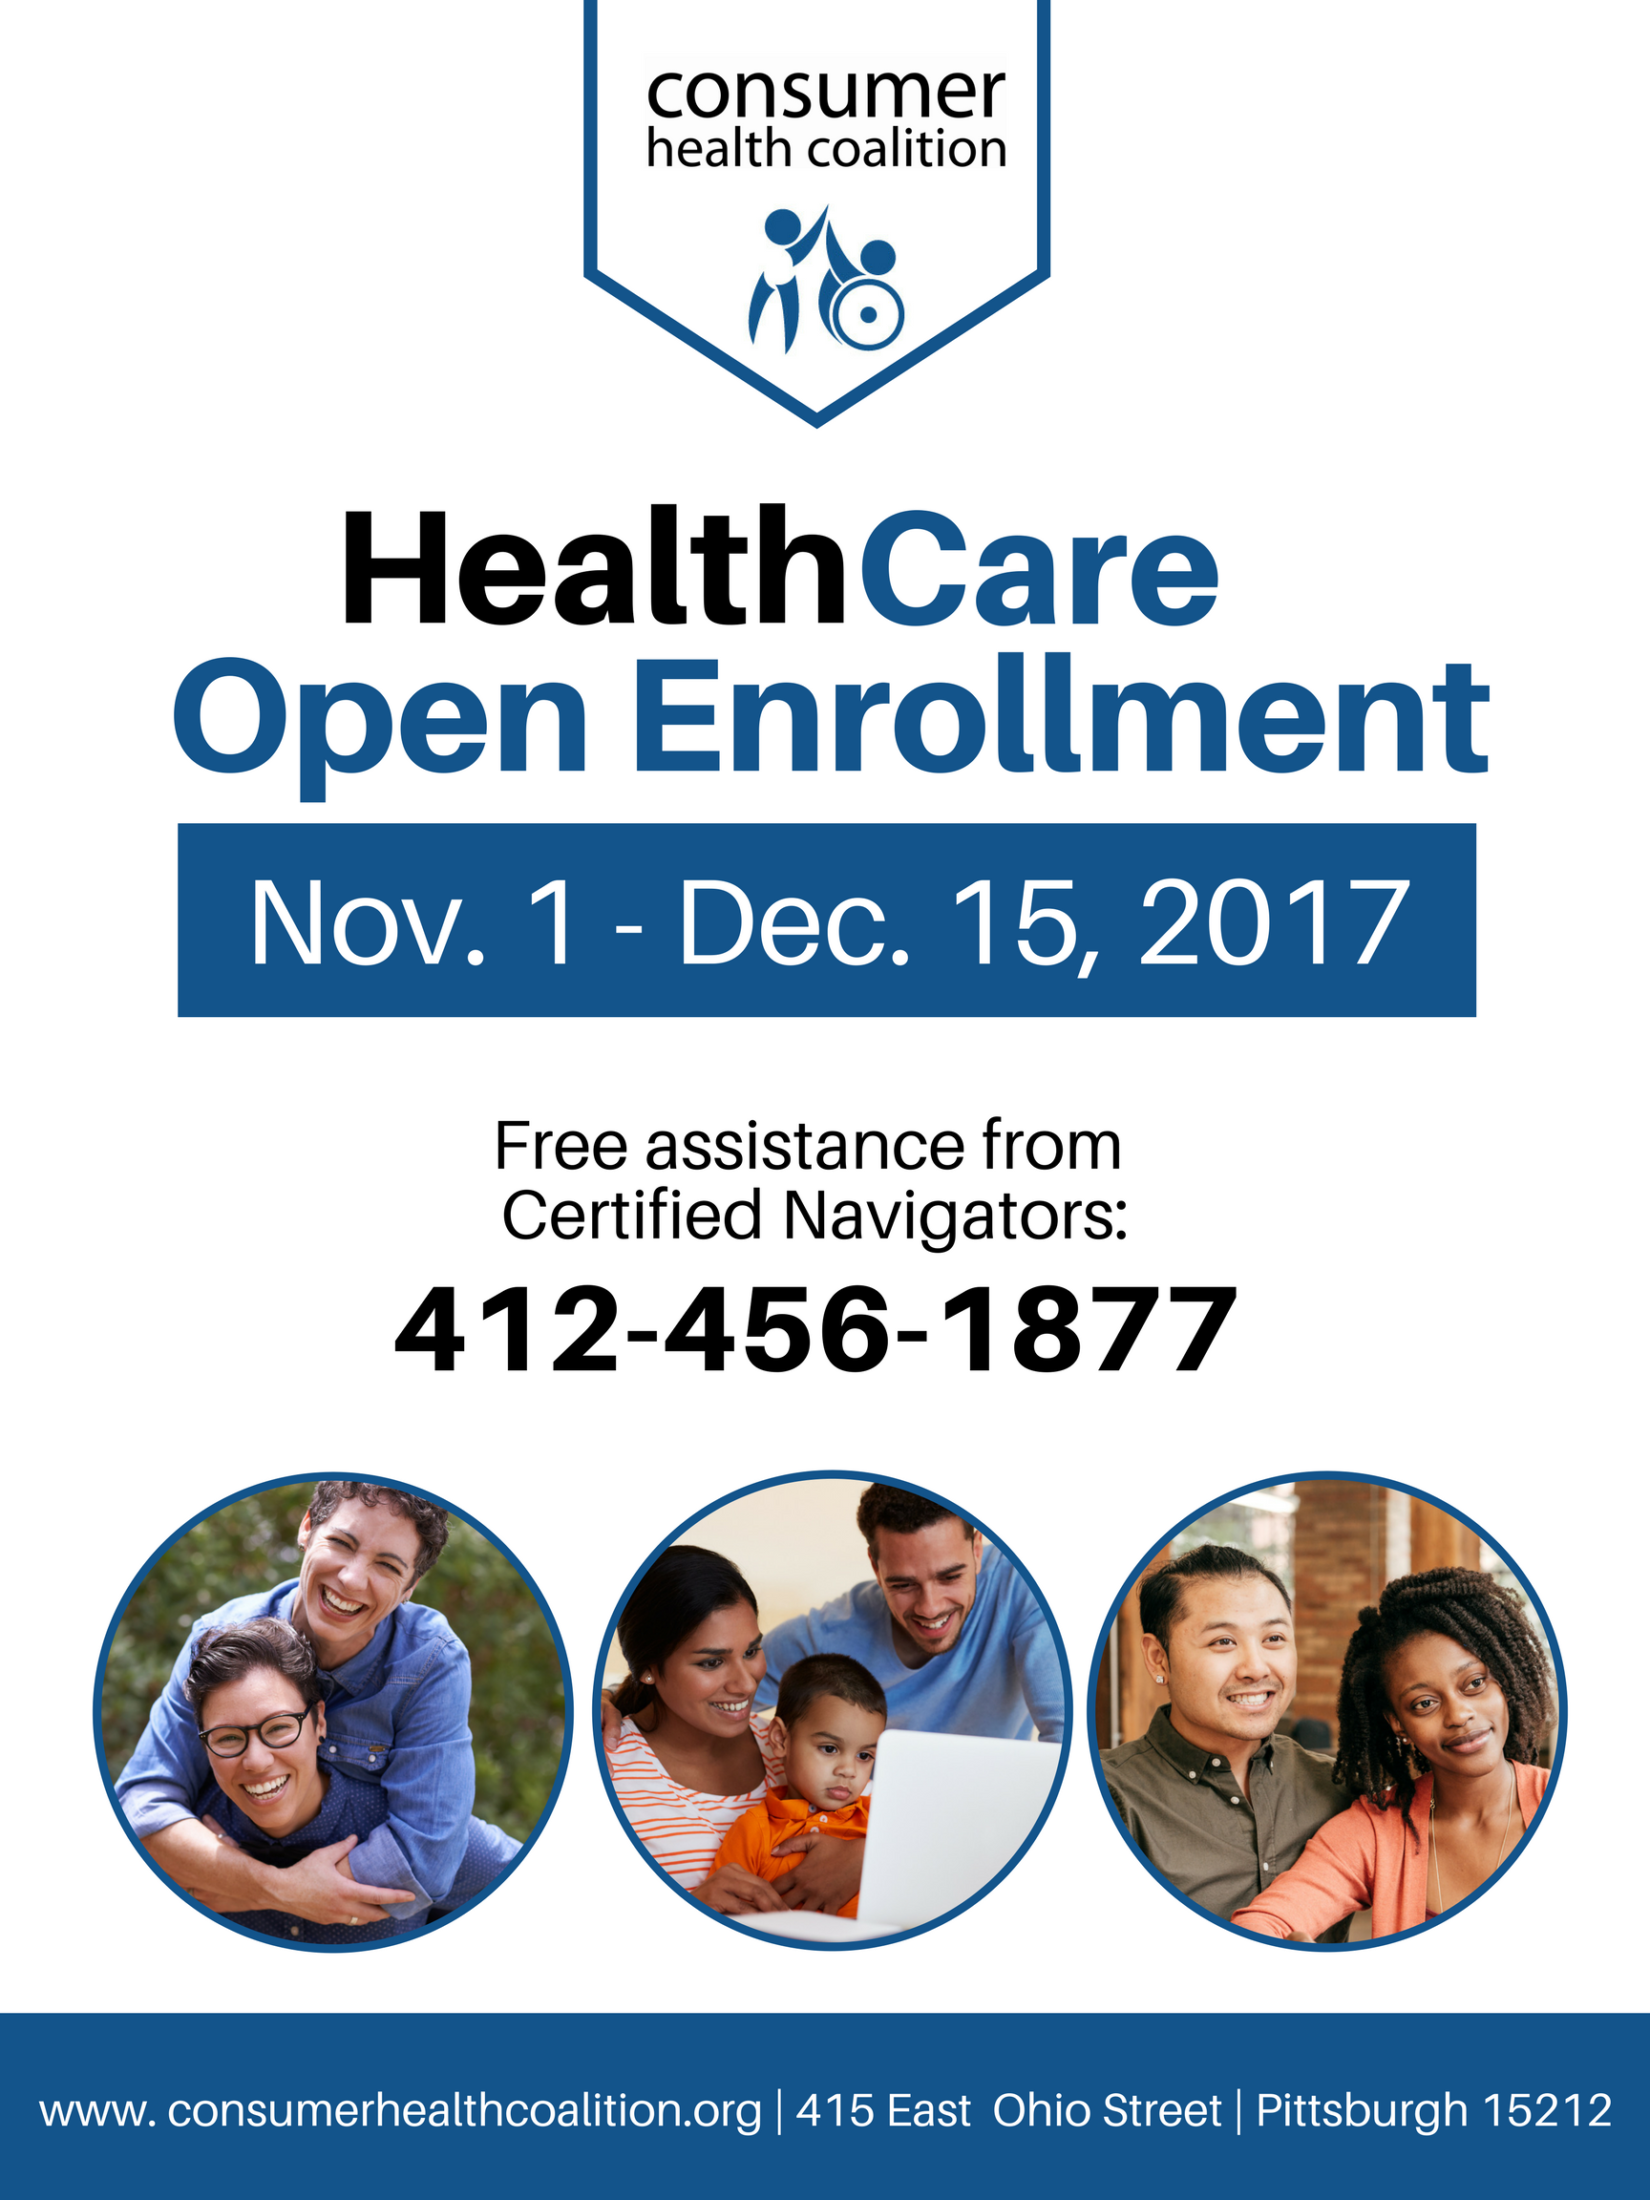 Affordable Care Act Marketplace American HealthCare Group